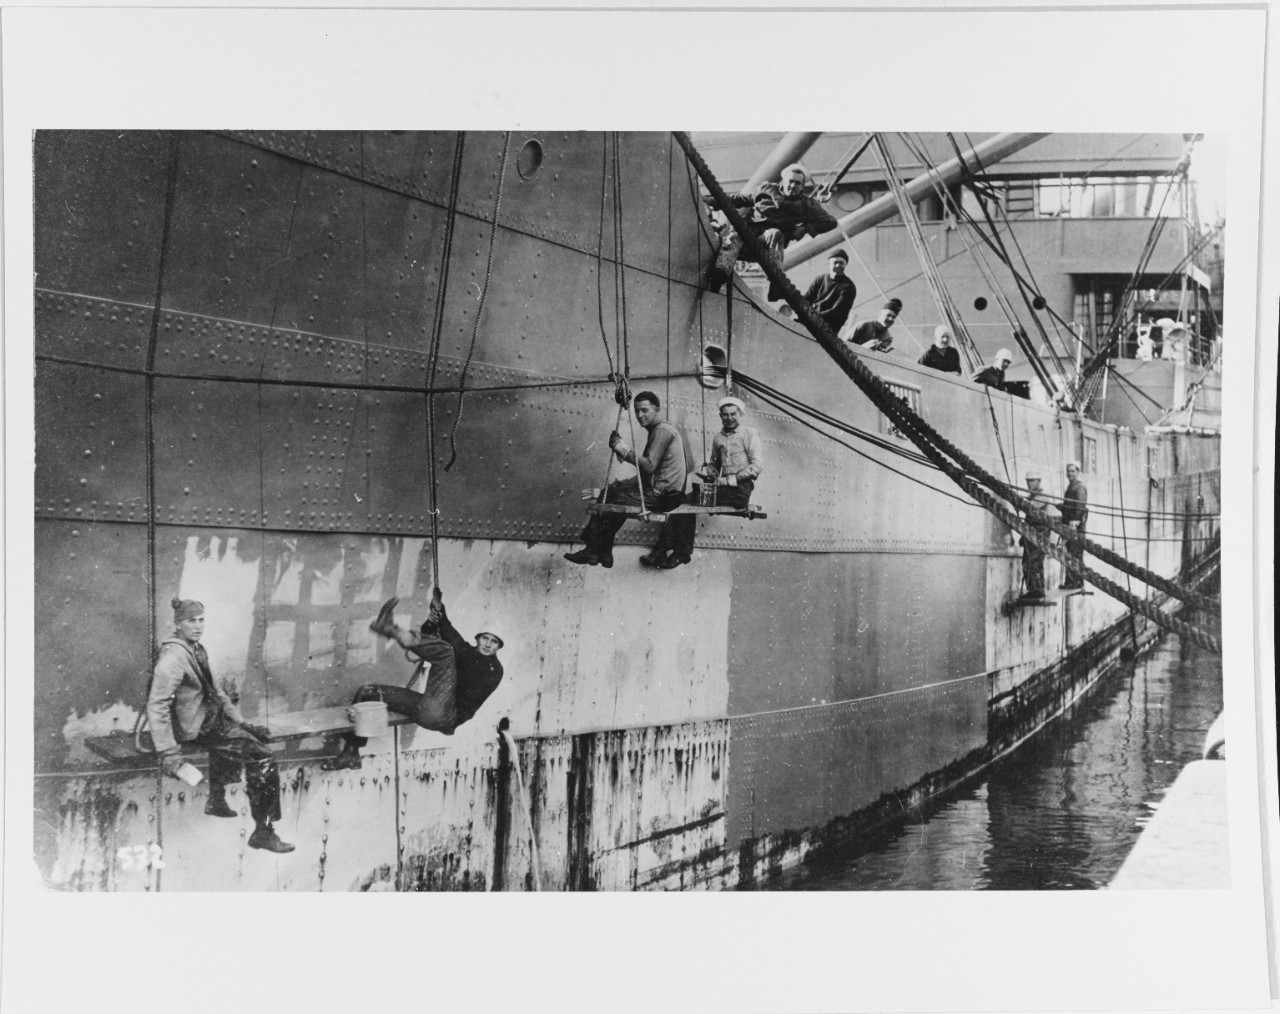 Painting a U.S. Navy auxiliary ship.